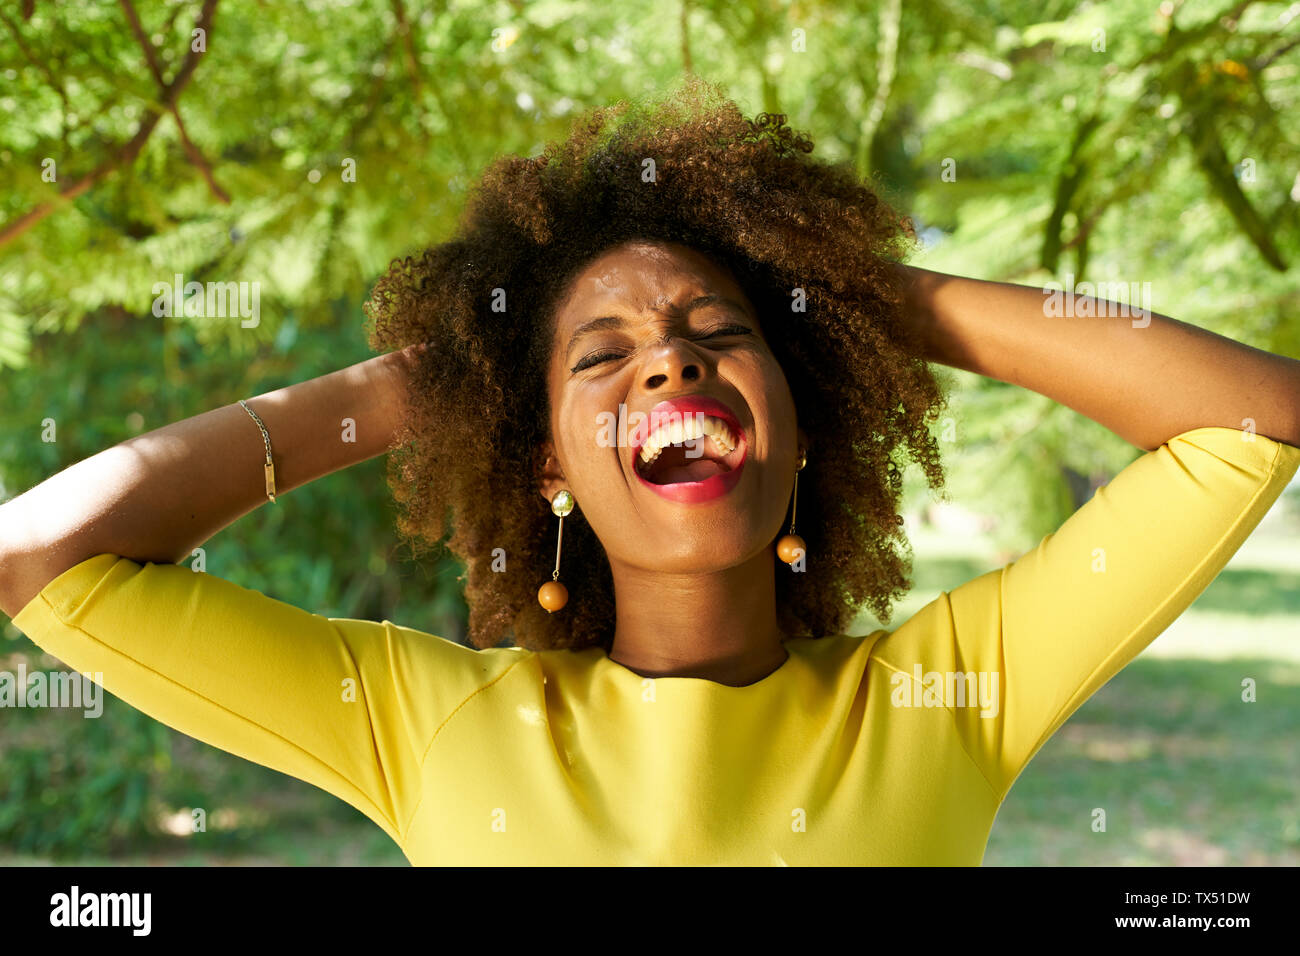 Portrait of young woman screaming for joy Stock Photo